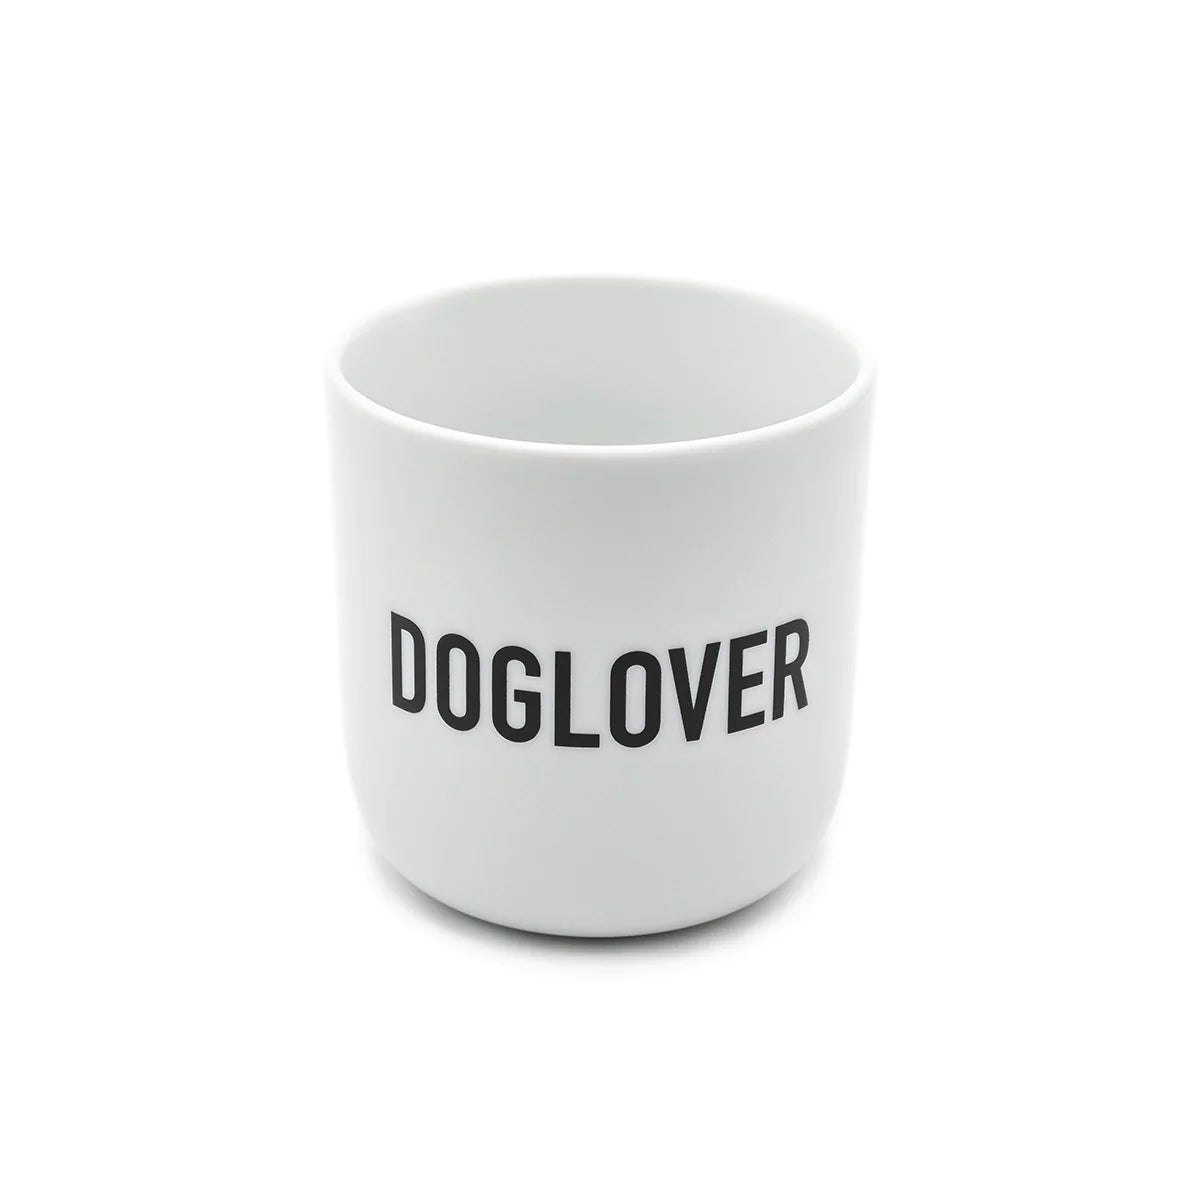 Cup DOGLOVER